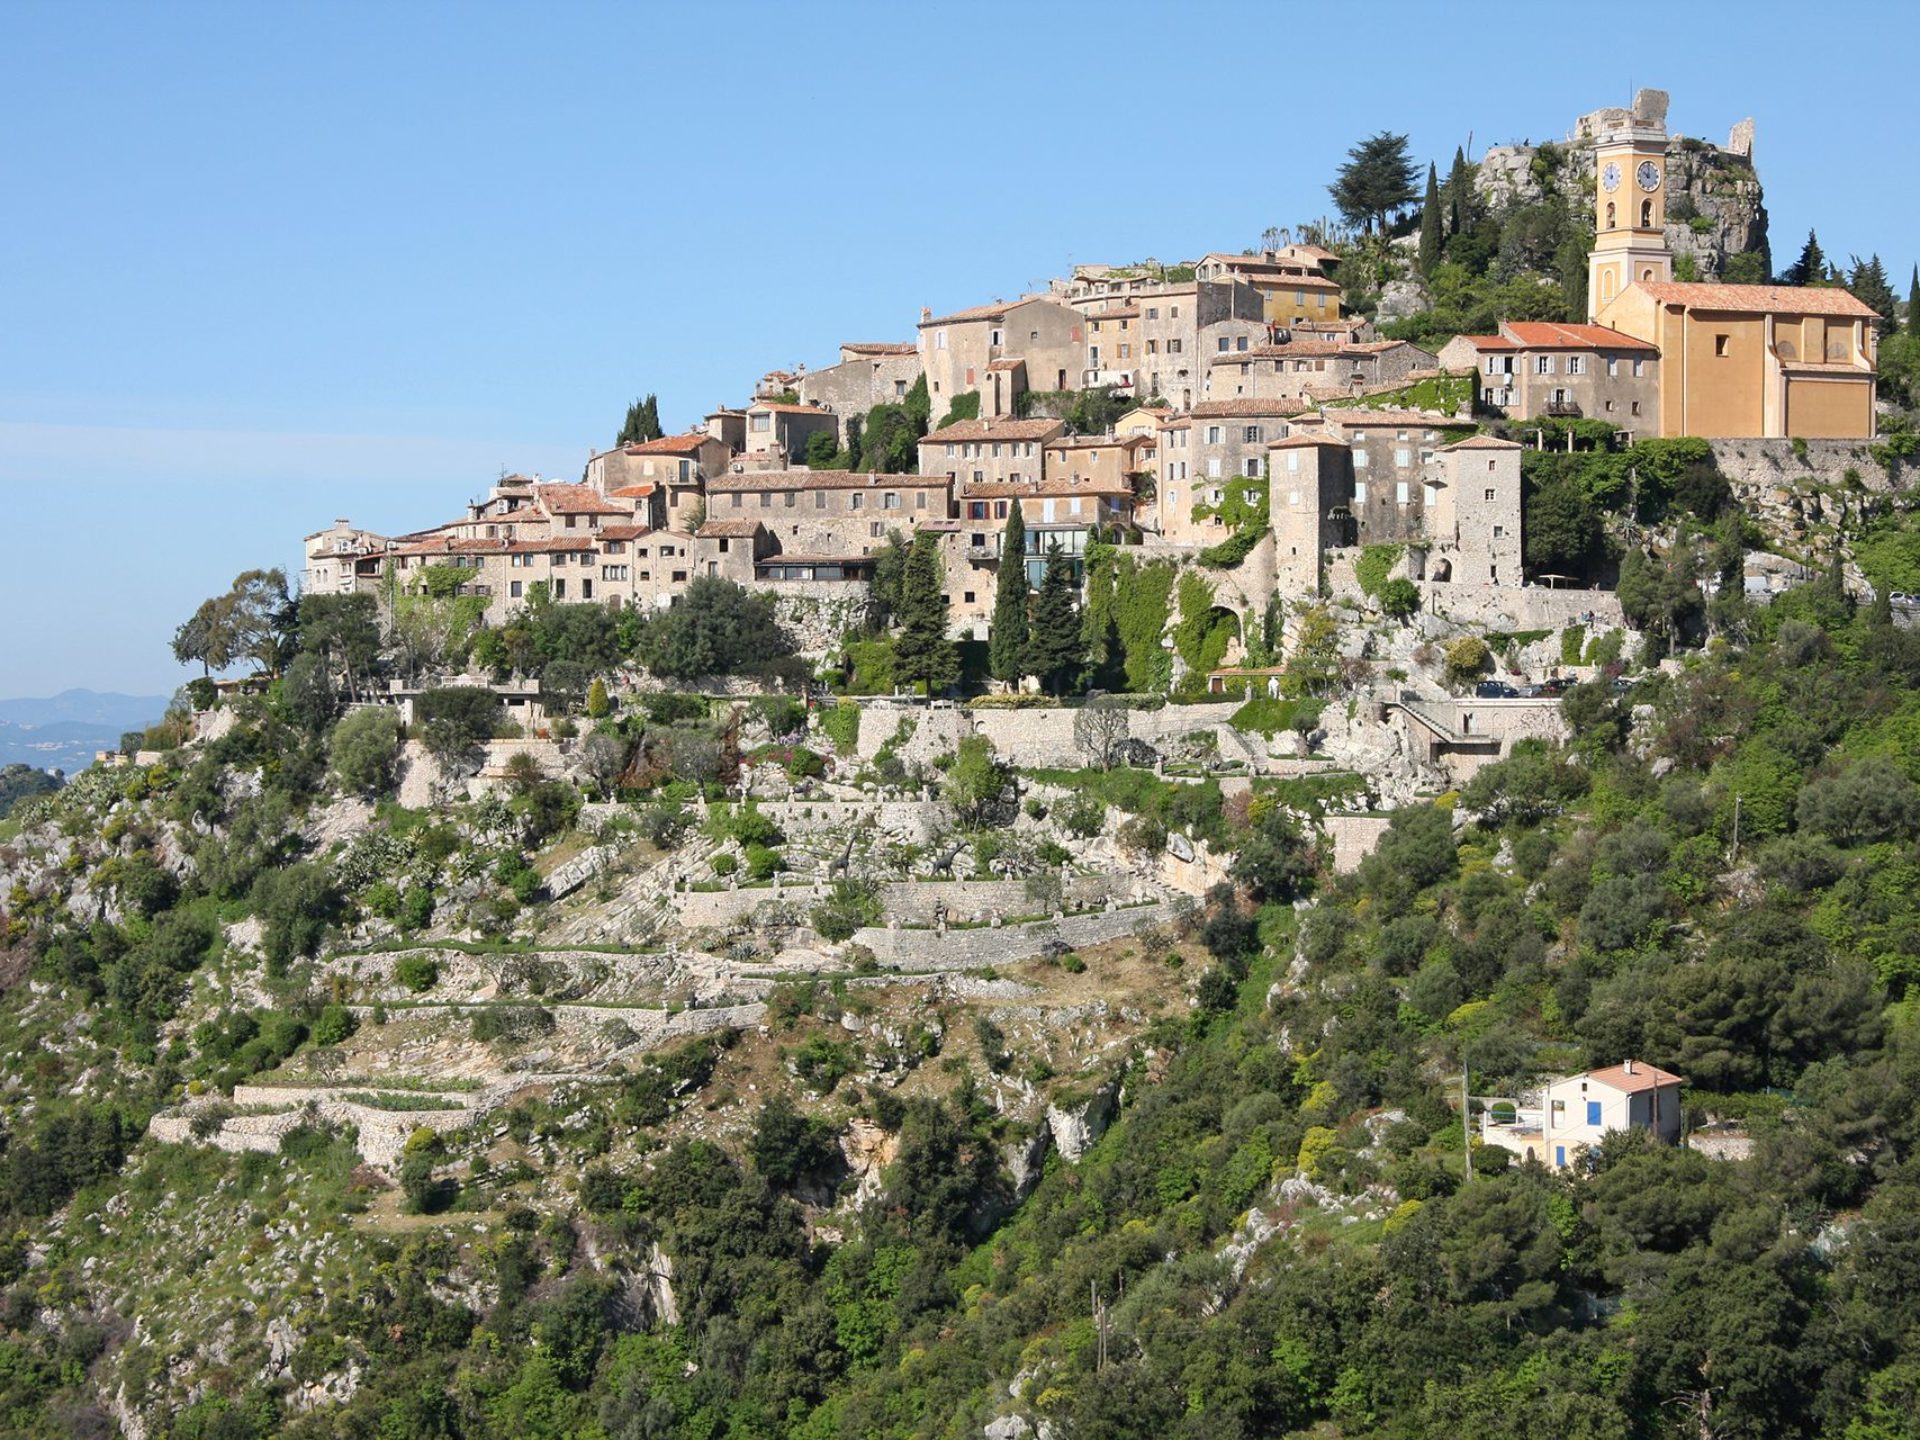 Sightseeing French Riviera l French Riviera Tours l Liven Up Monaco